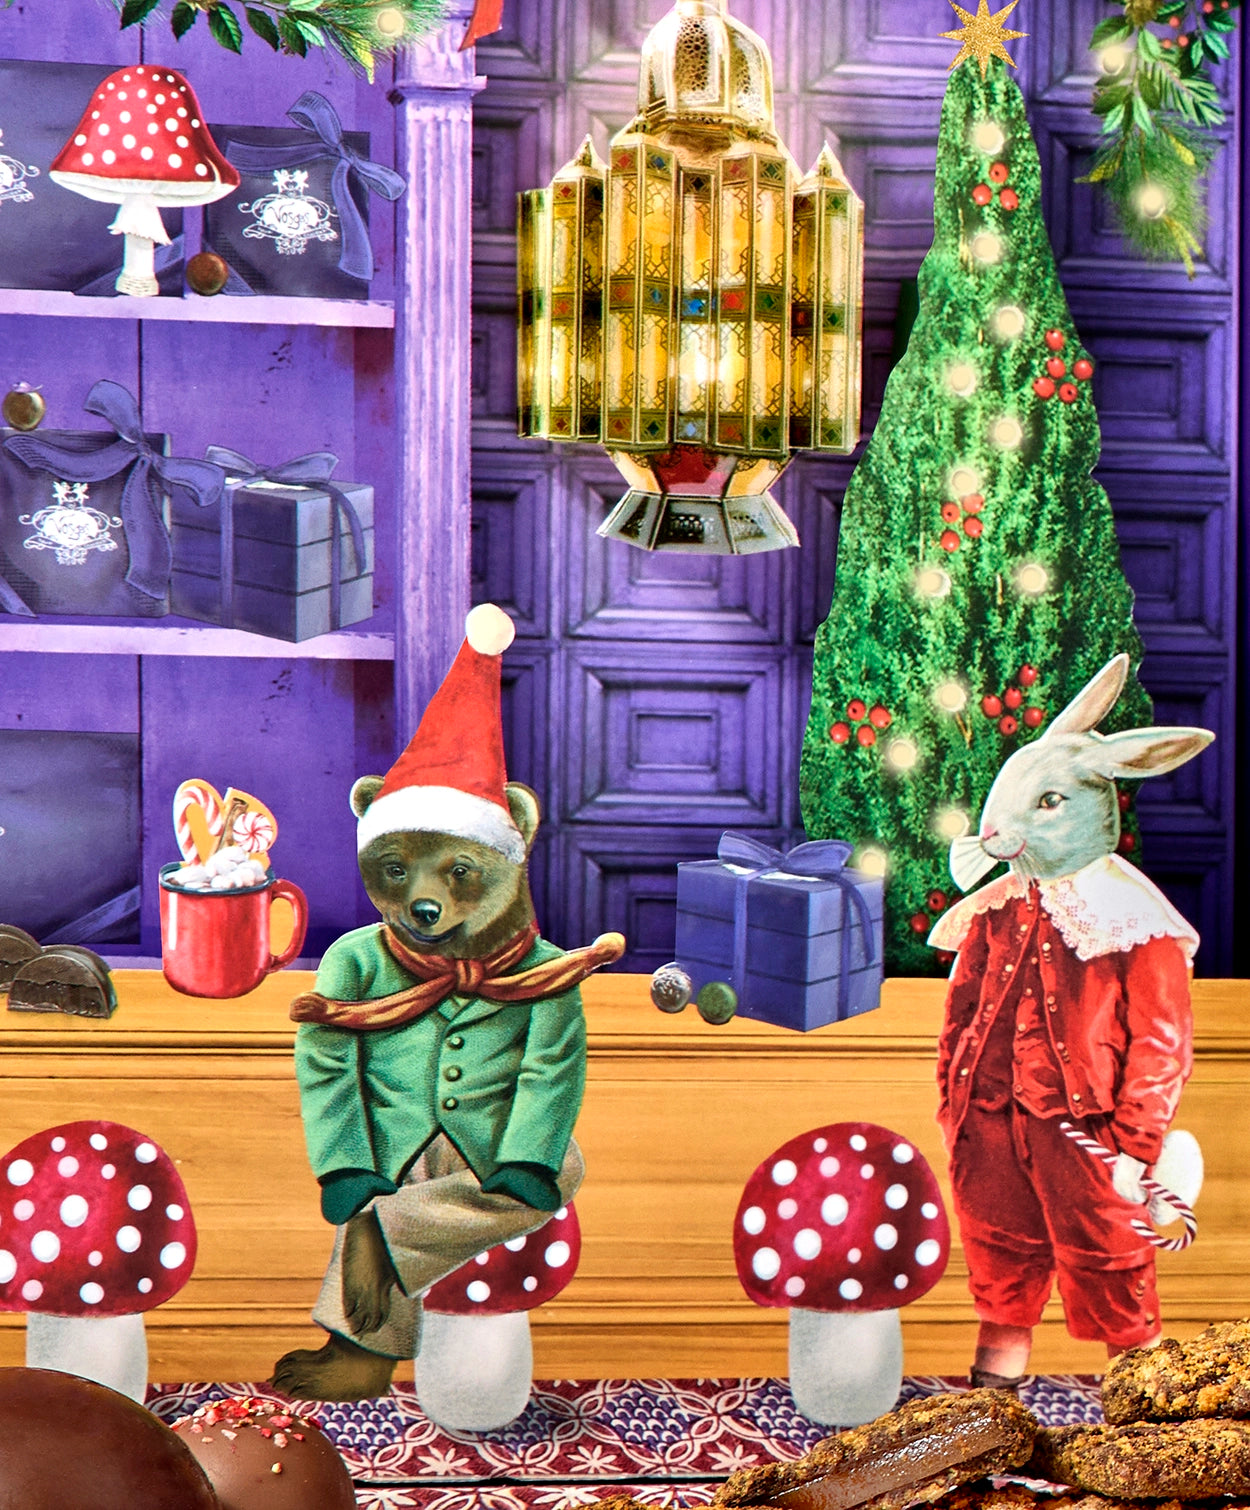 A bear wearing a green overcoat and a white rabbit dressed in a red three piece suit sit on two mushroom stools enjoying each others company in the Vosges Haut-Chocolat Calendar of Advent.